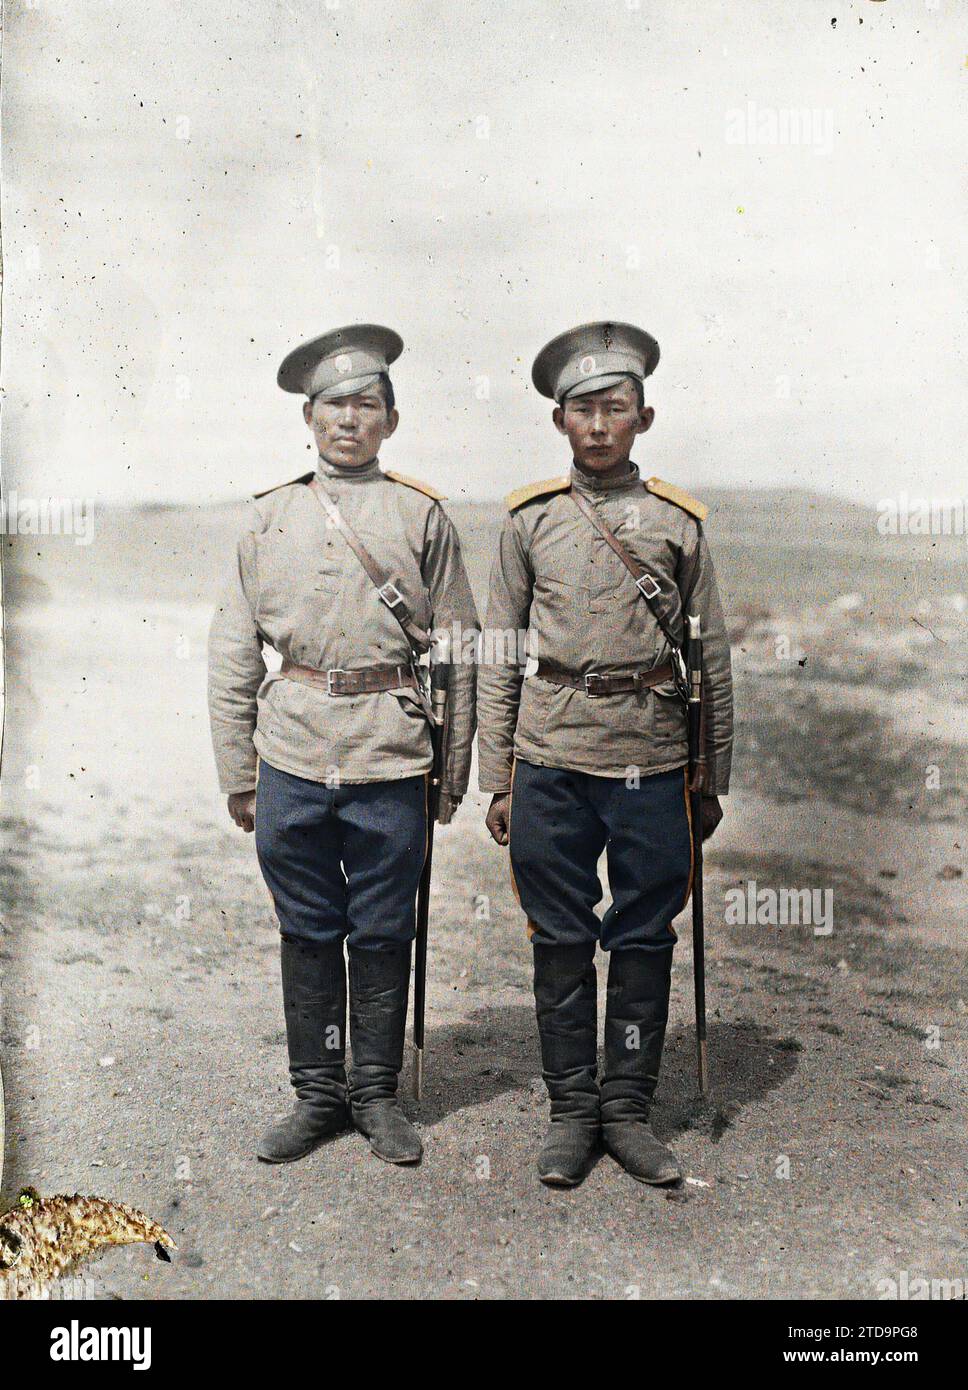 Urga, Mongolia Two Cossack soldiers, Clothing, International relations, HD, Human beings, Society, Military uniform, Costume, Foreign presence, exists in high definition, Weapon, Man, Army, Urga, Baikal Cossacks, Buryat types, Oulan-Bator, 25/07/1913 - 25/07/1913, Passet, Stéphane, photographer, 1913 - Mongolie, Mongolia - Stéphane Passet - (6-25 July), Autochrome, photo, Glass, Autochrome, photo, Positive, Vertical, Size 9 x 12 cm Stock Photo